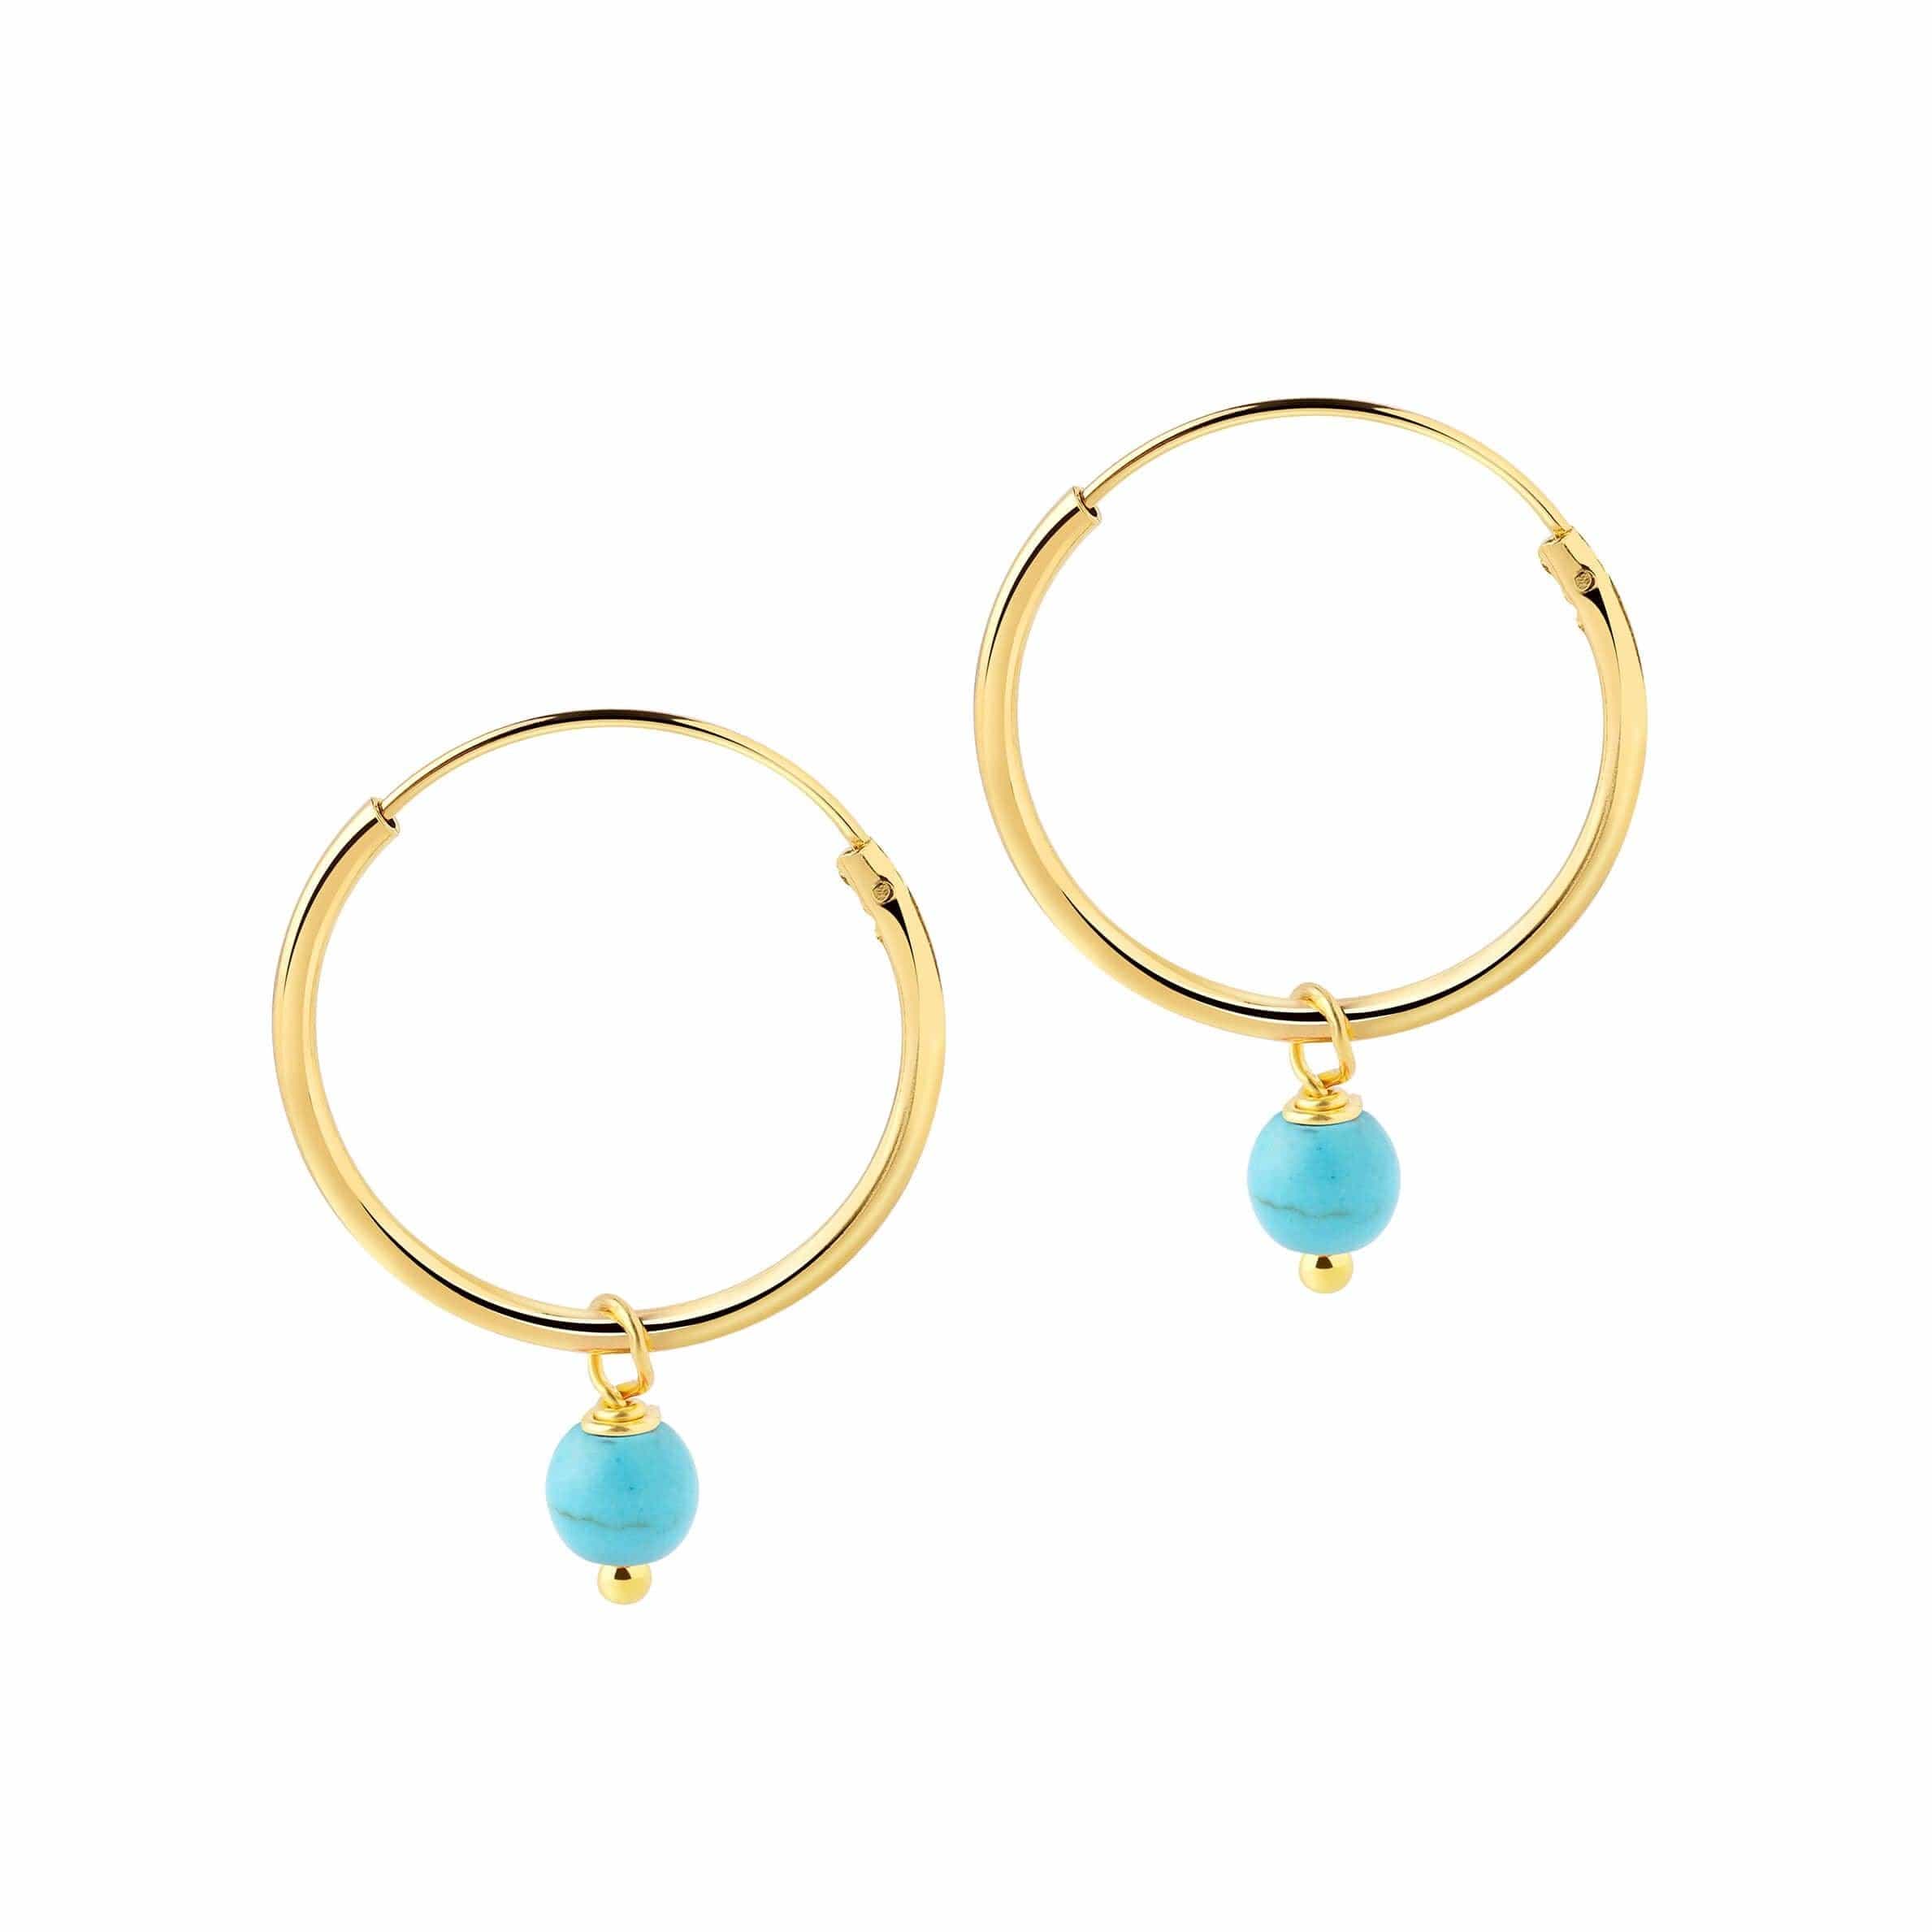 18mm Gold Plated Hoop Earrings with Turquoise Blue Stone